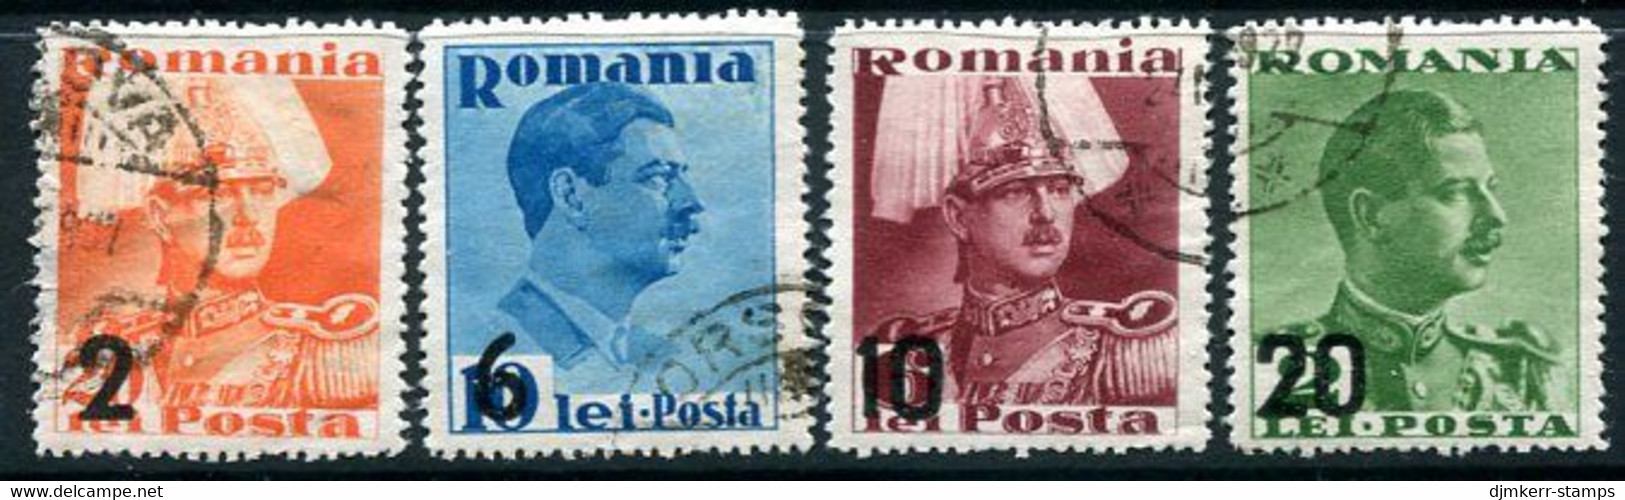 ROMANIA 1938 Surcharges Ex Block Used  Michel 543-46 - Used Stamps